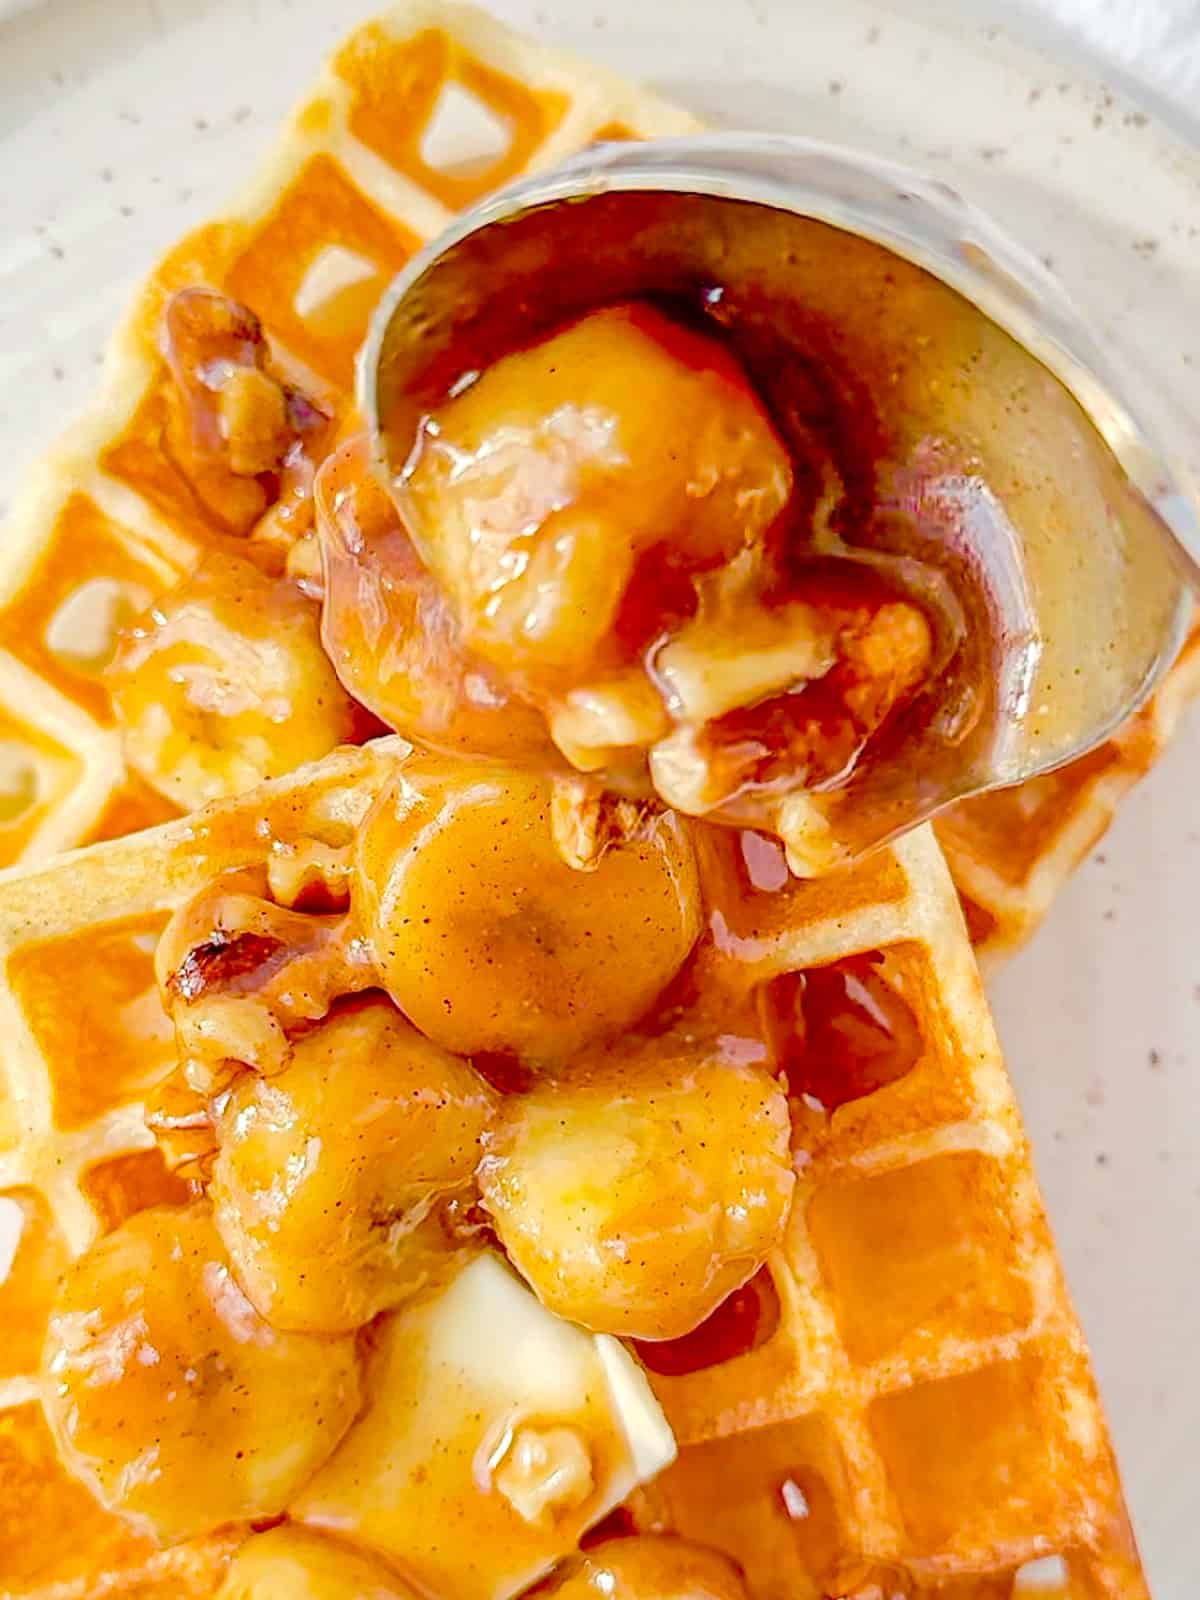 Pouring bananas foster sauce on buttermilk waffles.